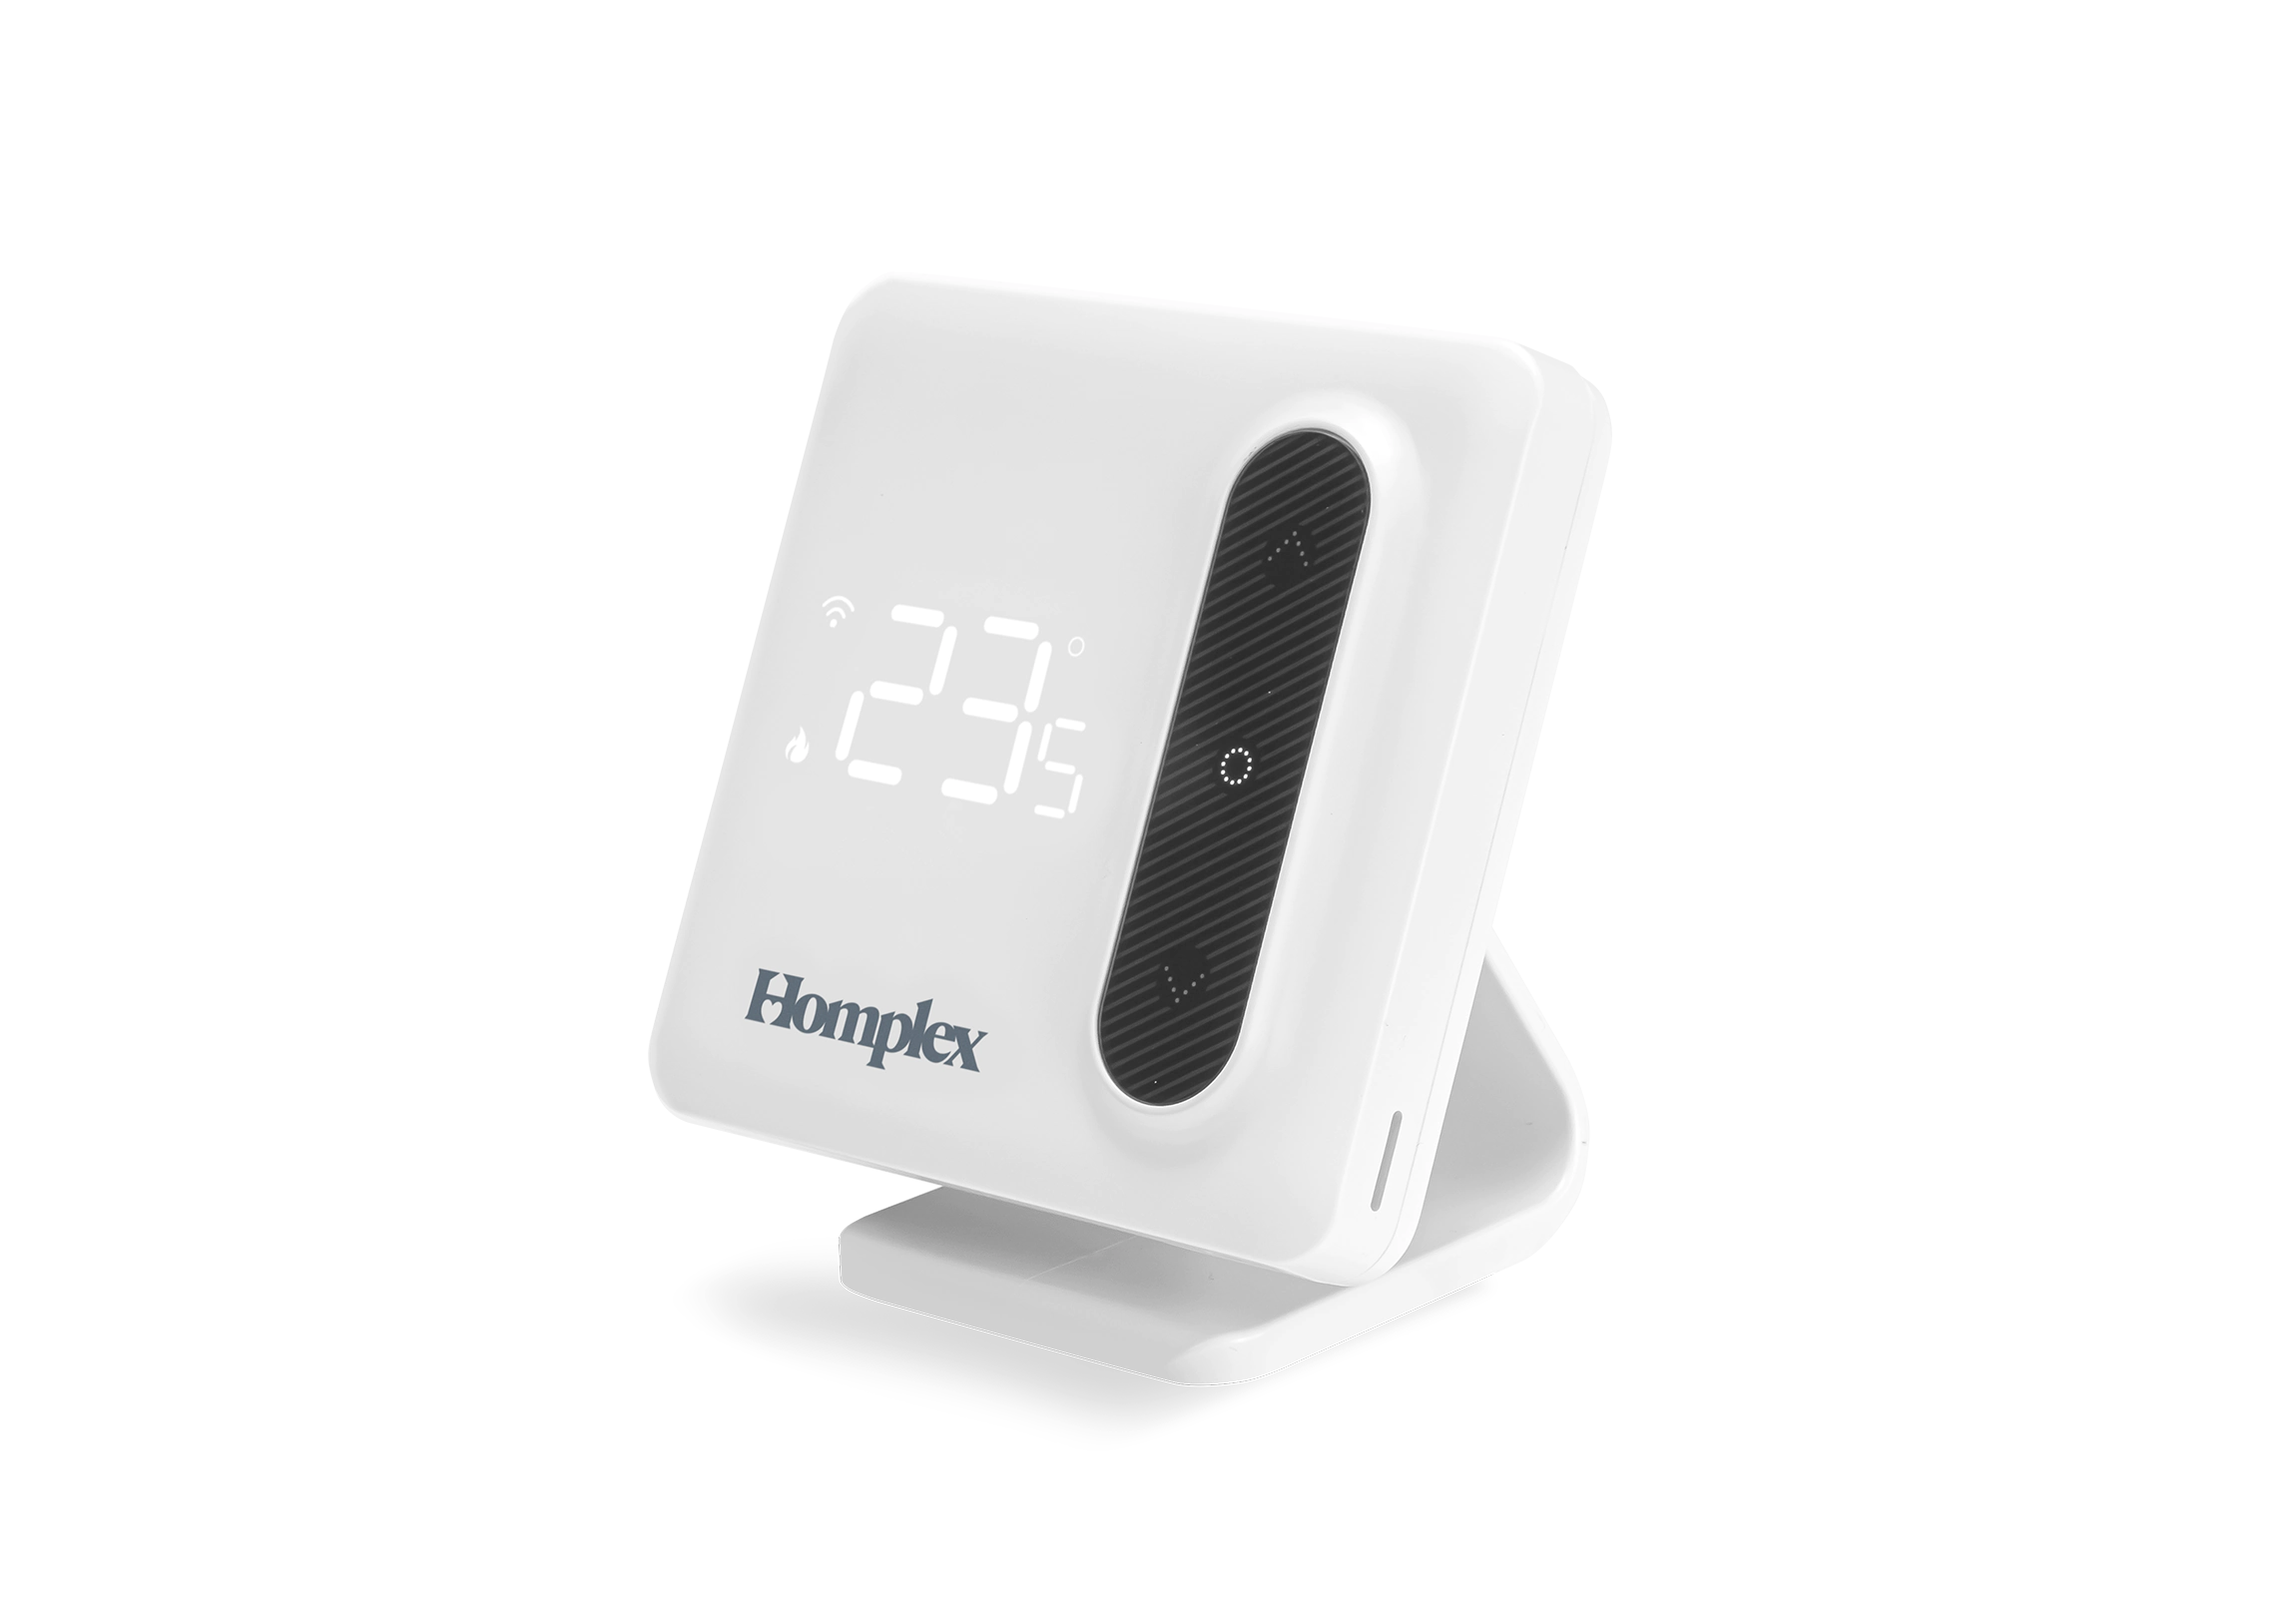 Homplex HT2310 WR intelligent room thermostat with stand